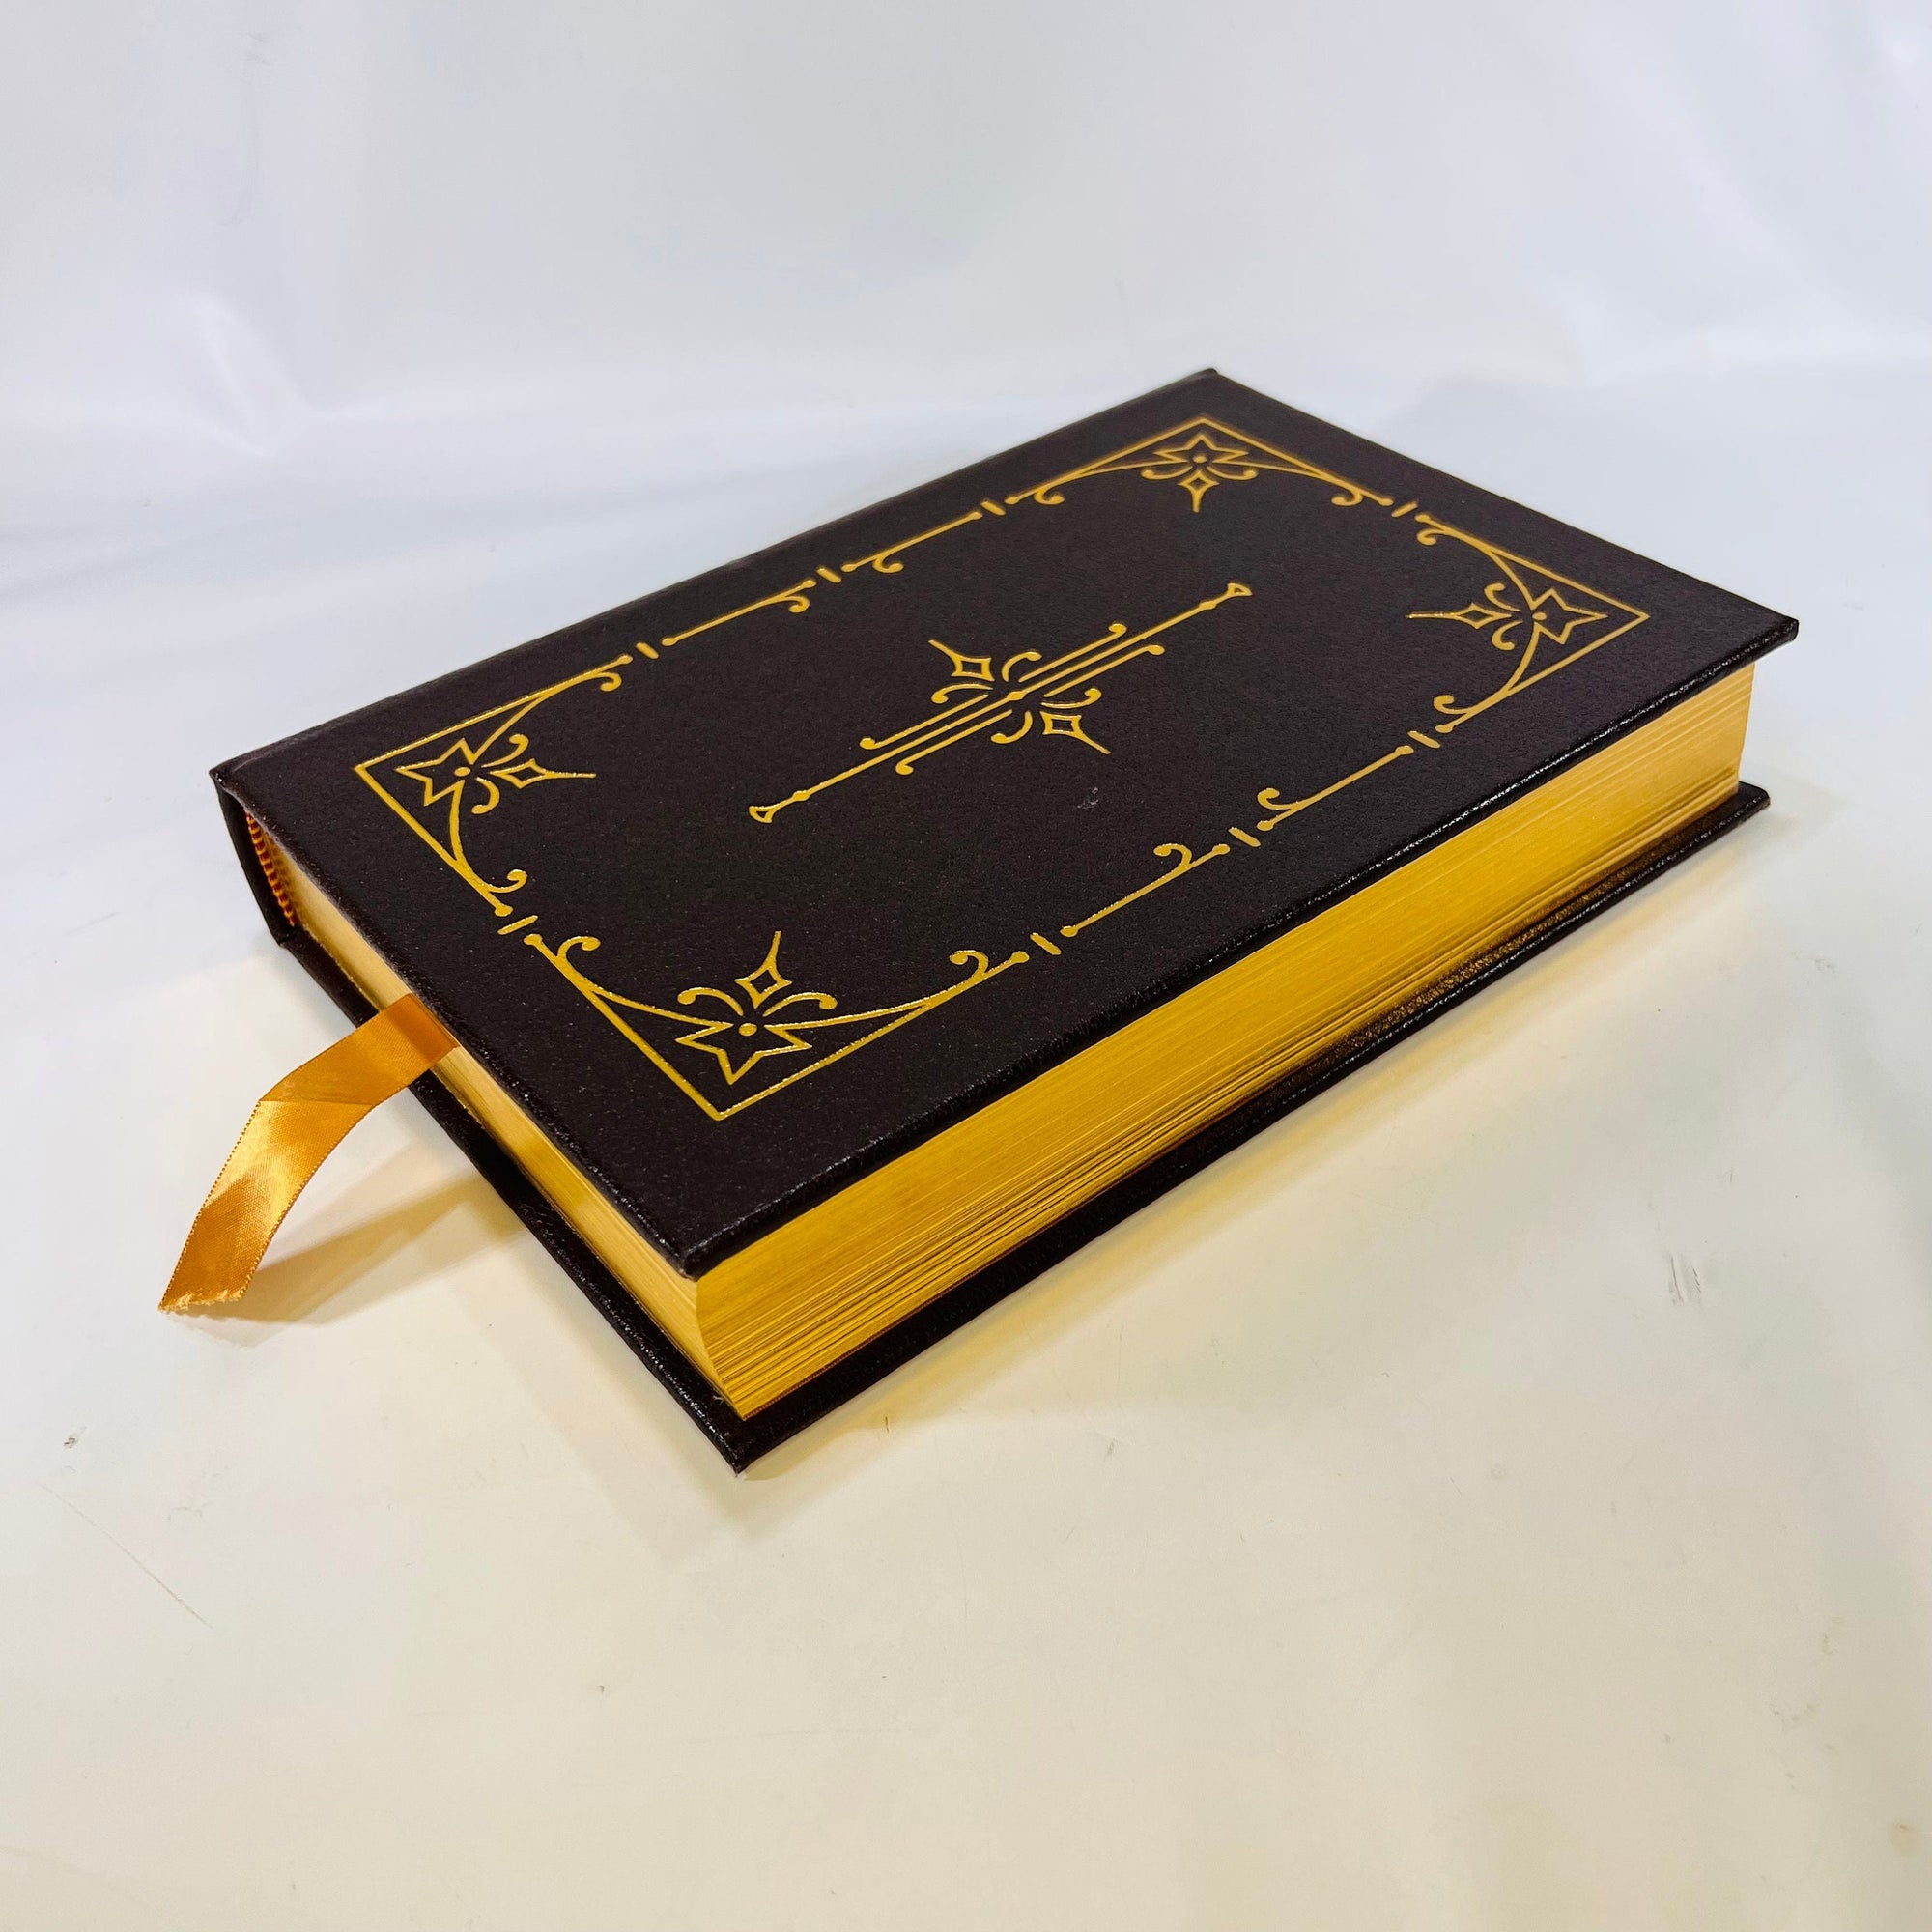 The Short Stories of Charles Dickens 1978 Easton Press part of the 100 Greatest Books